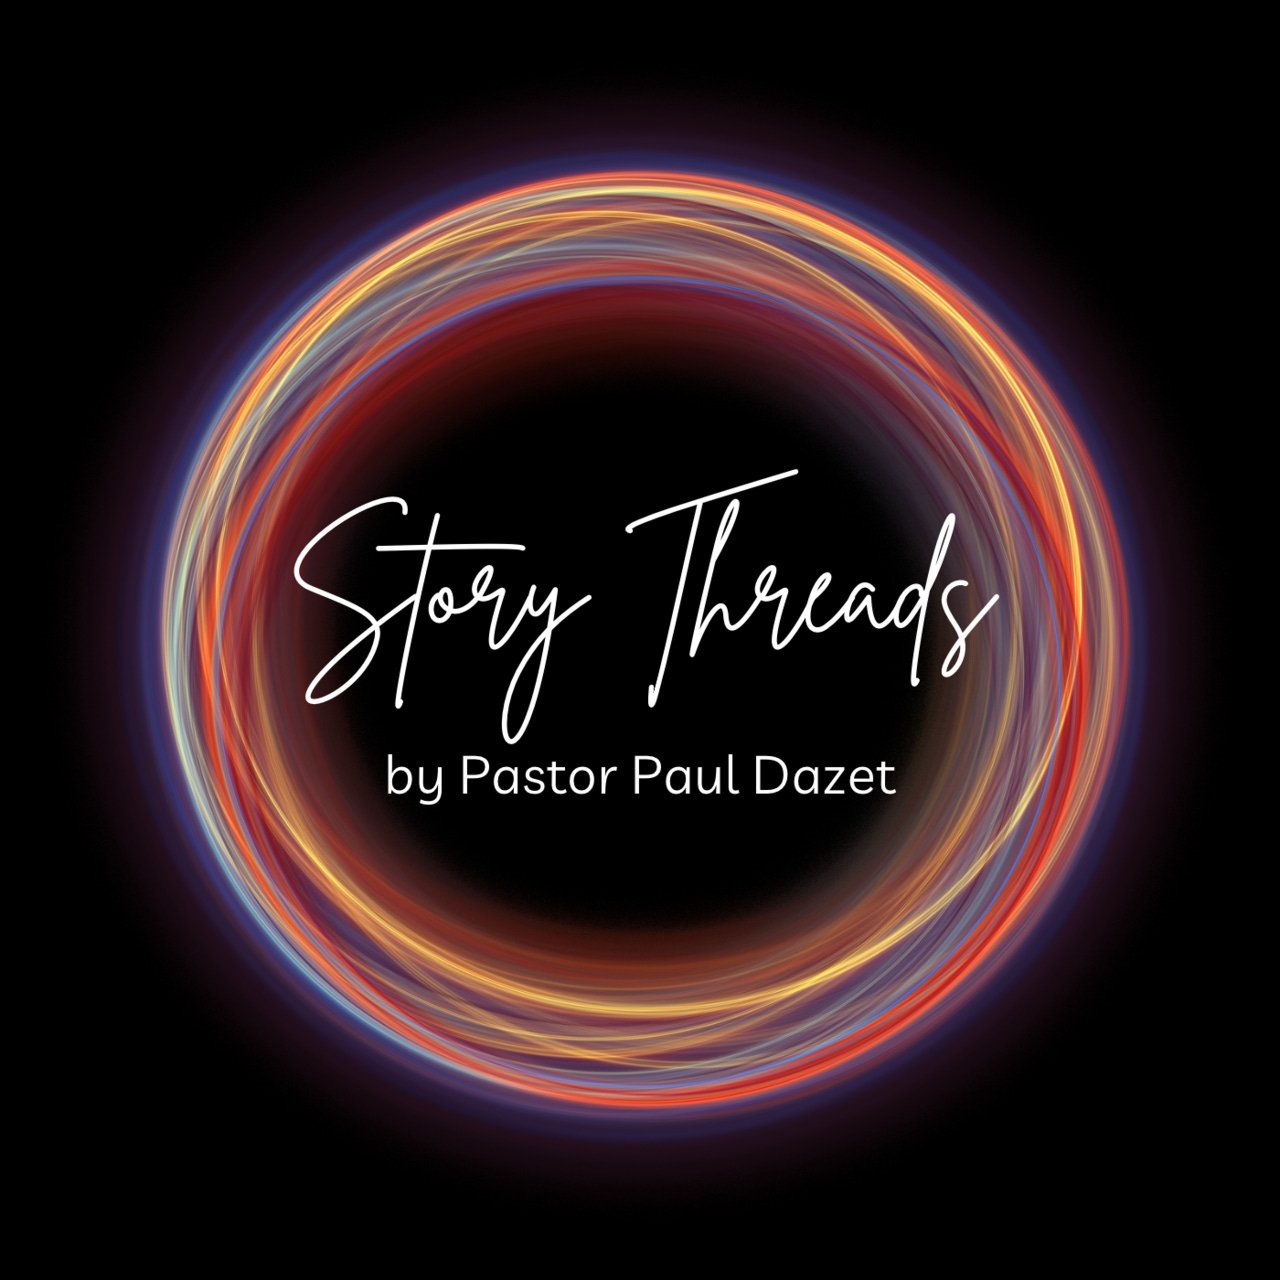 STORY THREADS: The Interwoven Story of Christ